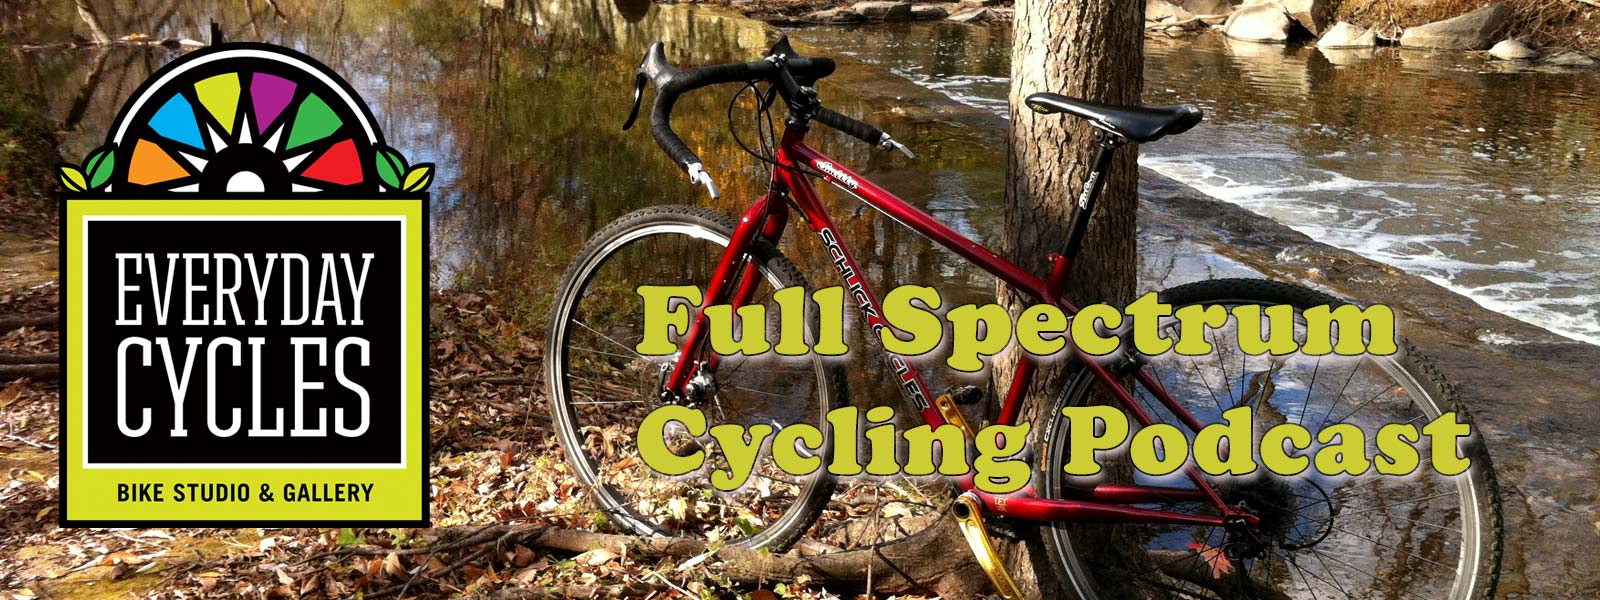 Everyday Cycles Introduces the Full Spectrum Cycling Podcast